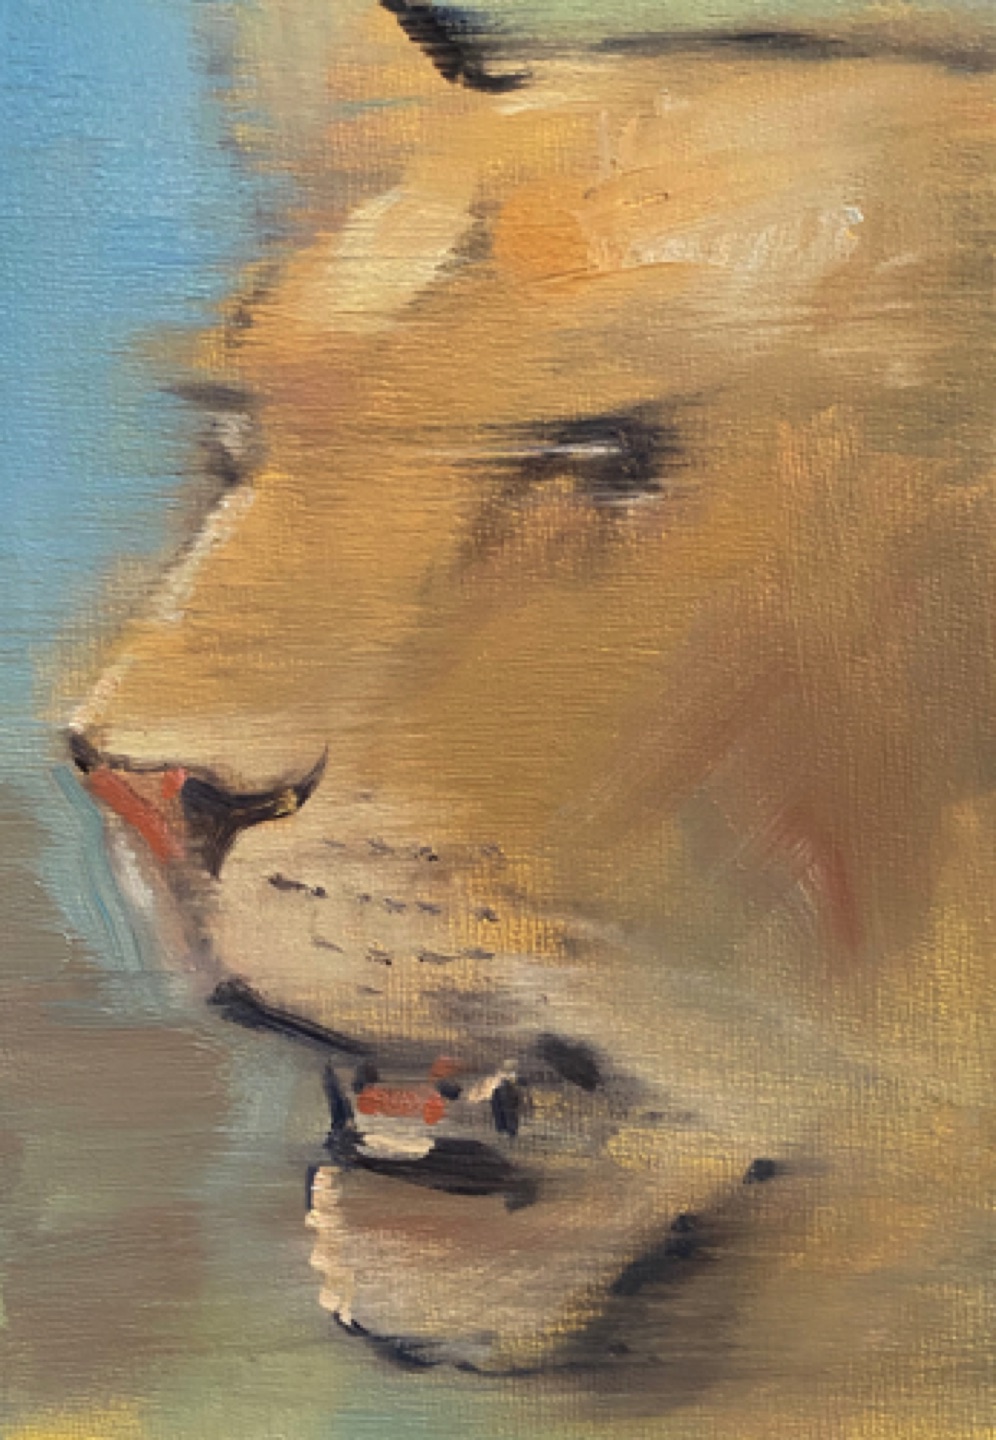 Gregg Chadwick
Panthera Leo
7"x5" oil on panel 2021
Private Collection, Los Angeles
Sold December 2022